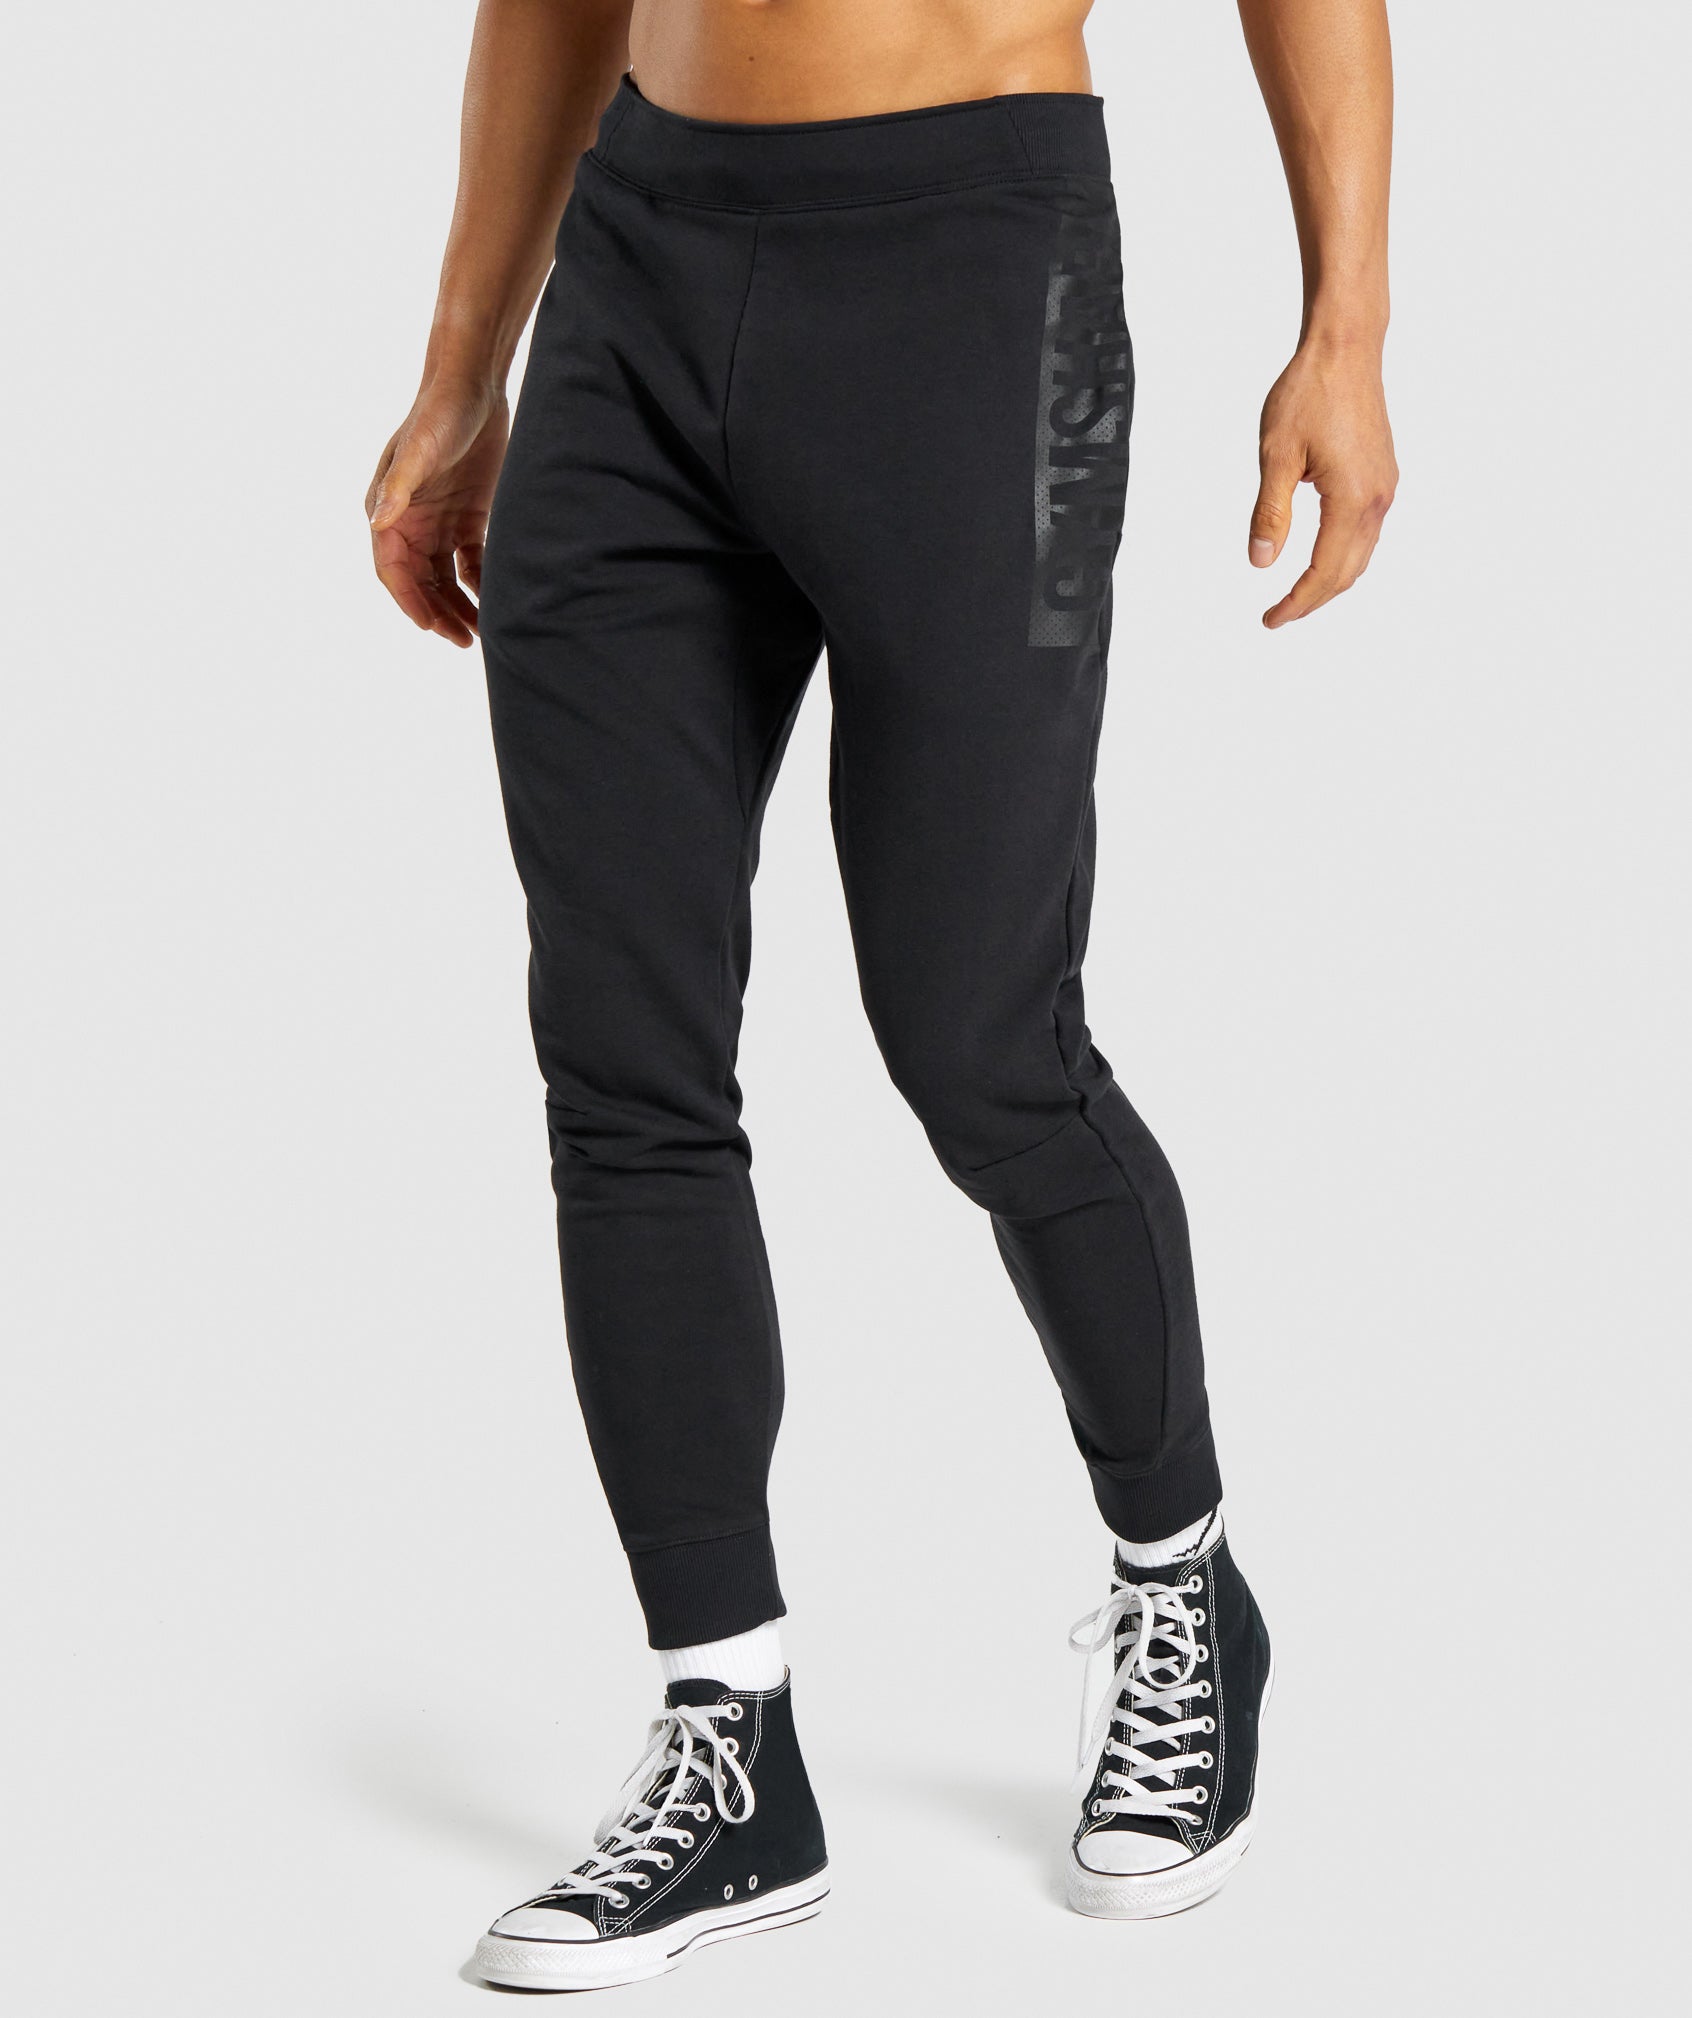 gymshark xxl size - OFF-68% >Free Delivery